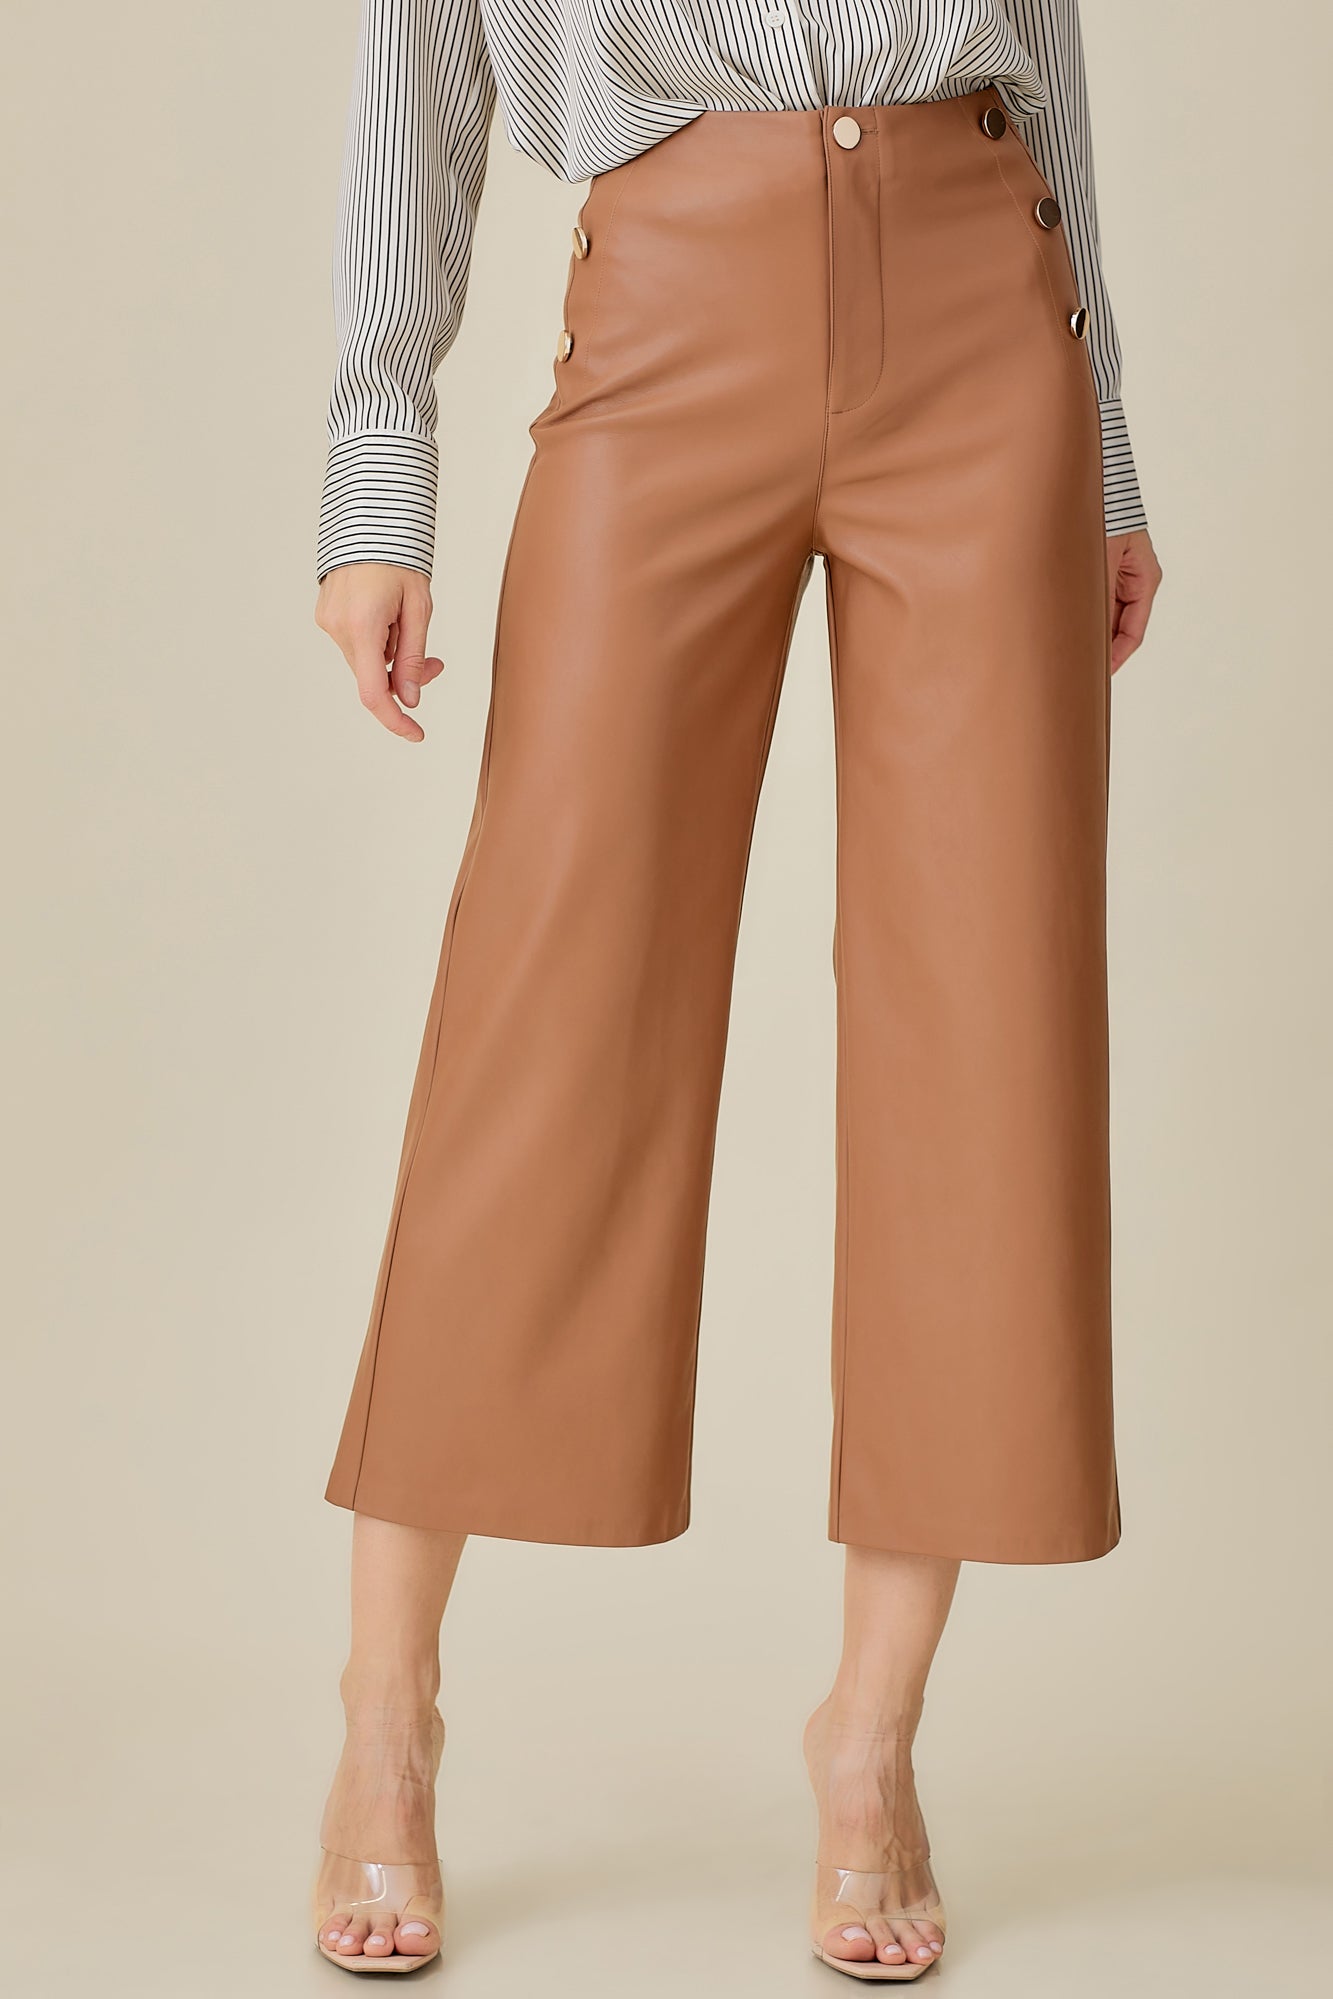 These trousers are the perfect addition to your wardrobe for any occasion. They feature brass buttons and a bootcut wide leg to show off all your statement shoes. Dressed up or down these are a instant classic.